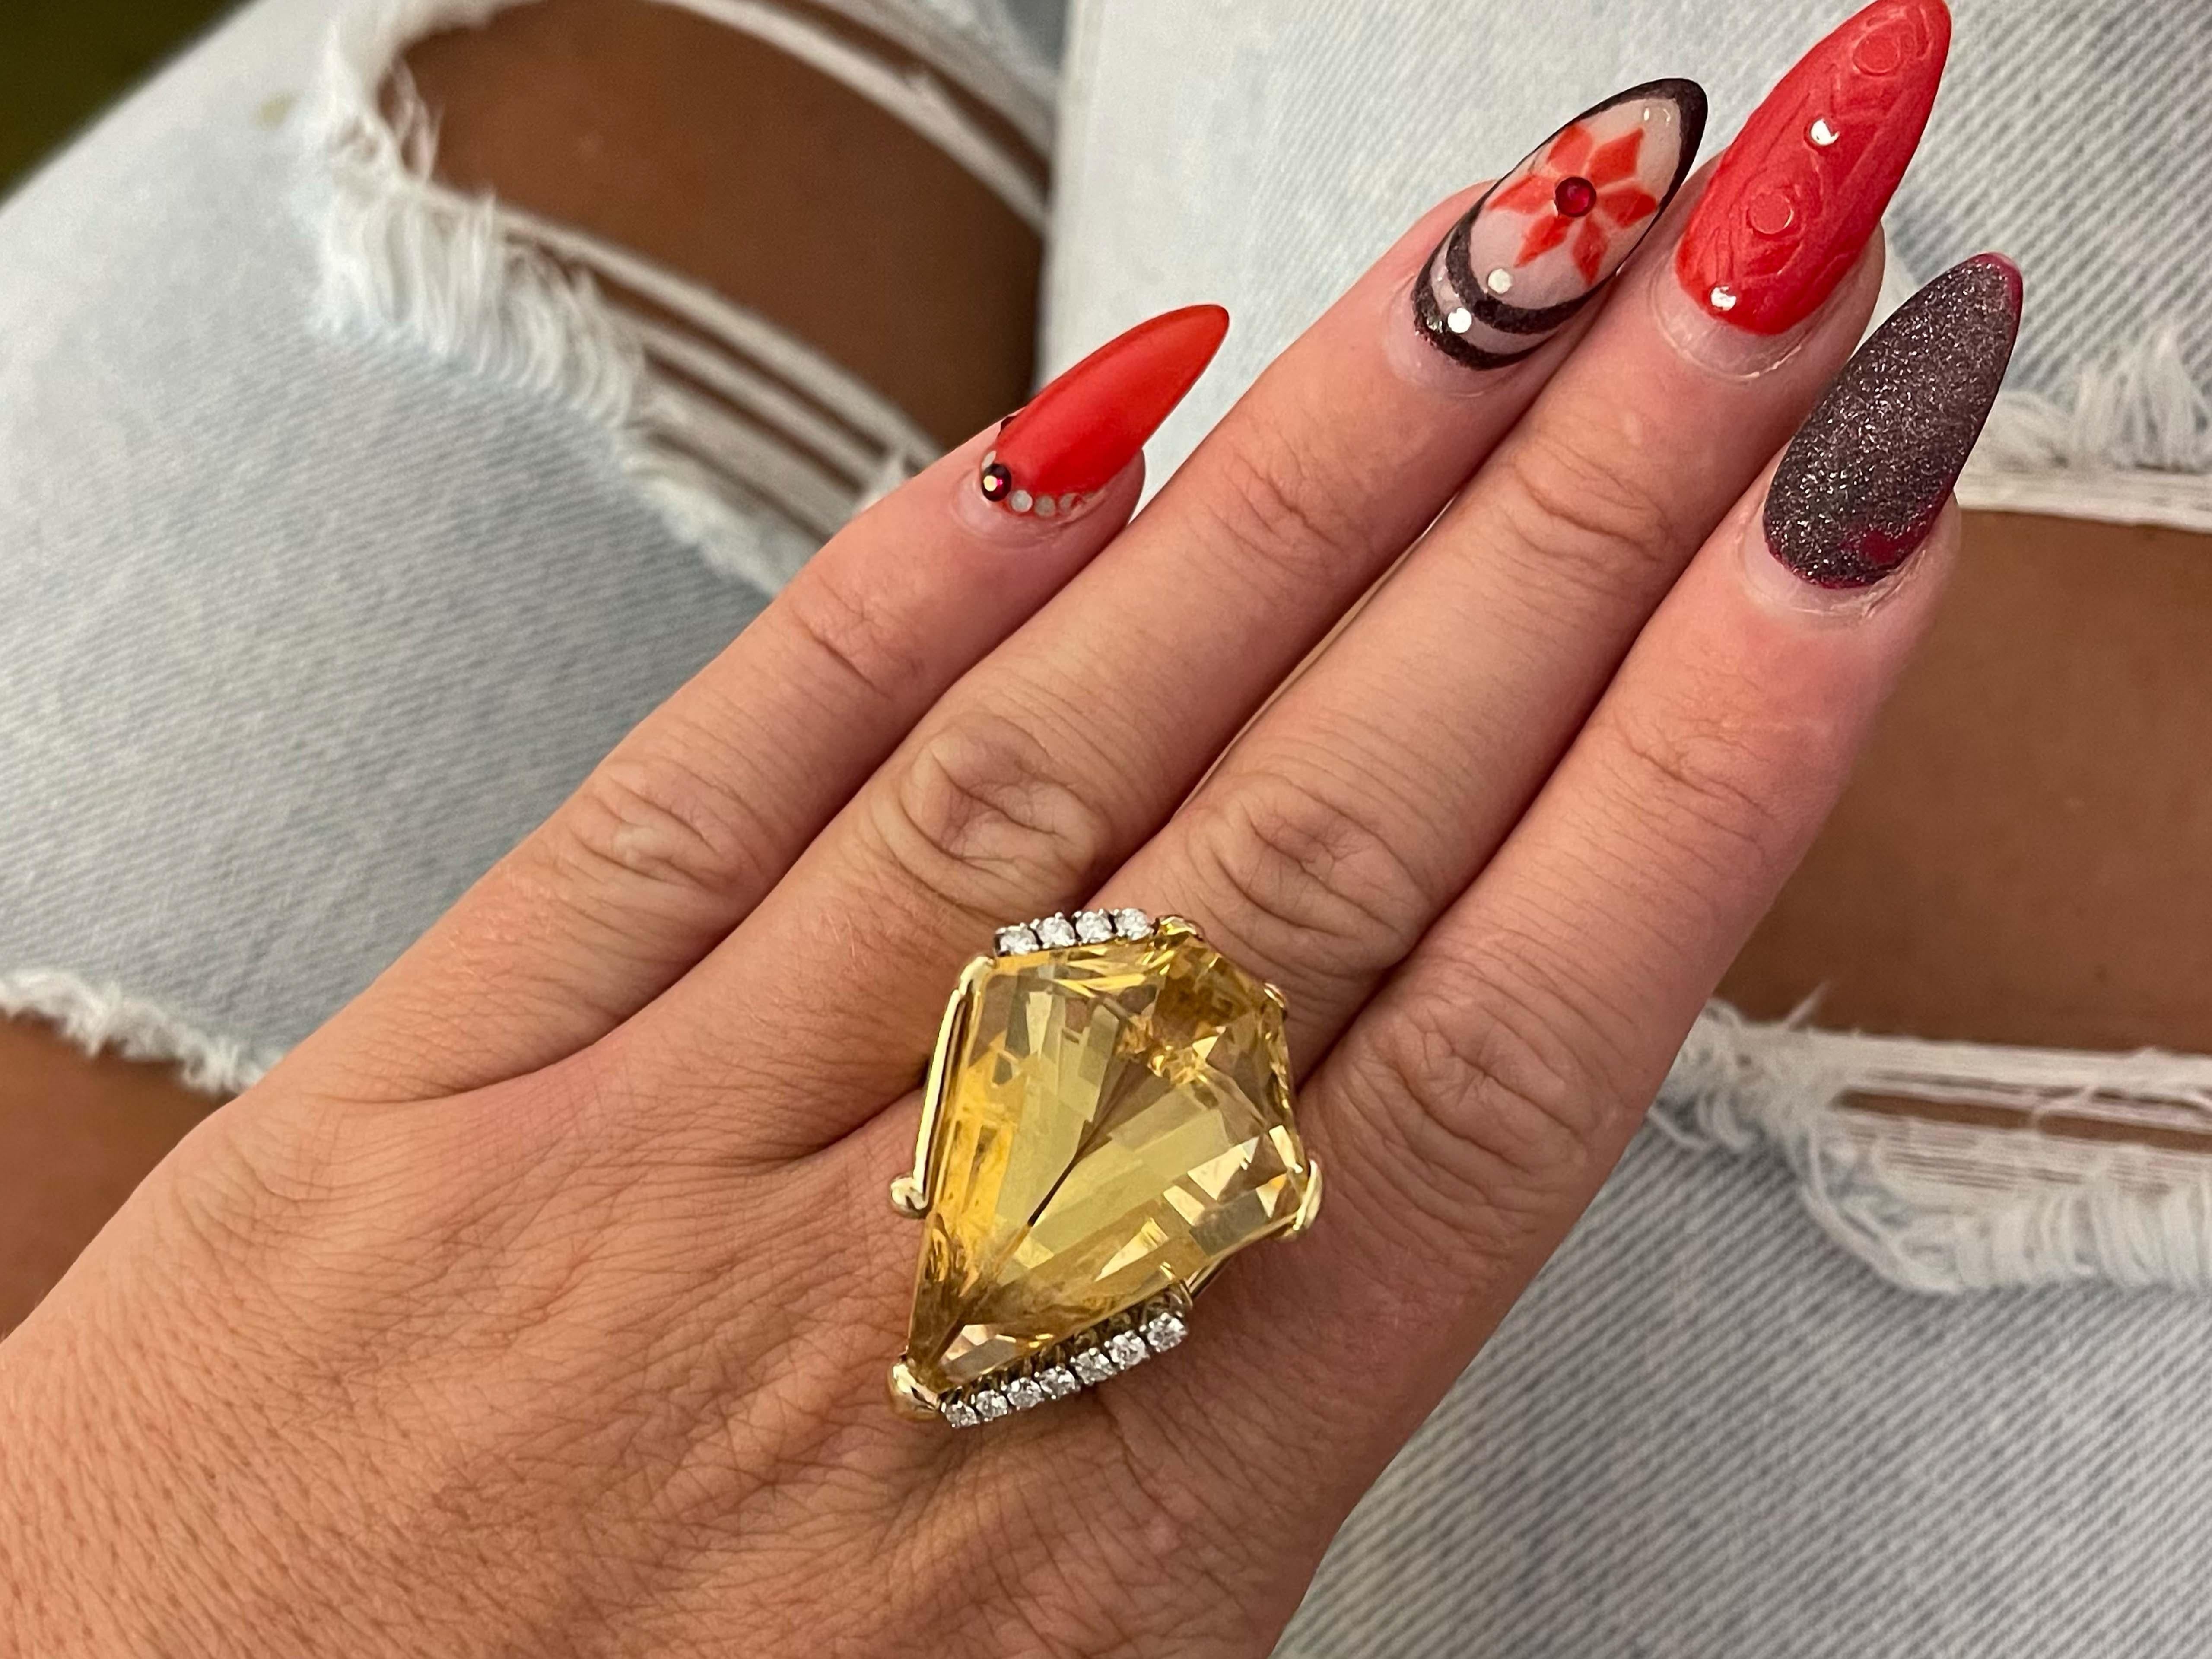 Item Specifications:

Metal: 14k Yellow Gold

Style: Statement Ring

Ring Size: 6.5 (resizing available for a fee)

Total Weight: 21.20 Grams

Gemstone Specifications: Citrine 

Center Gemstone Measurements: 1.25